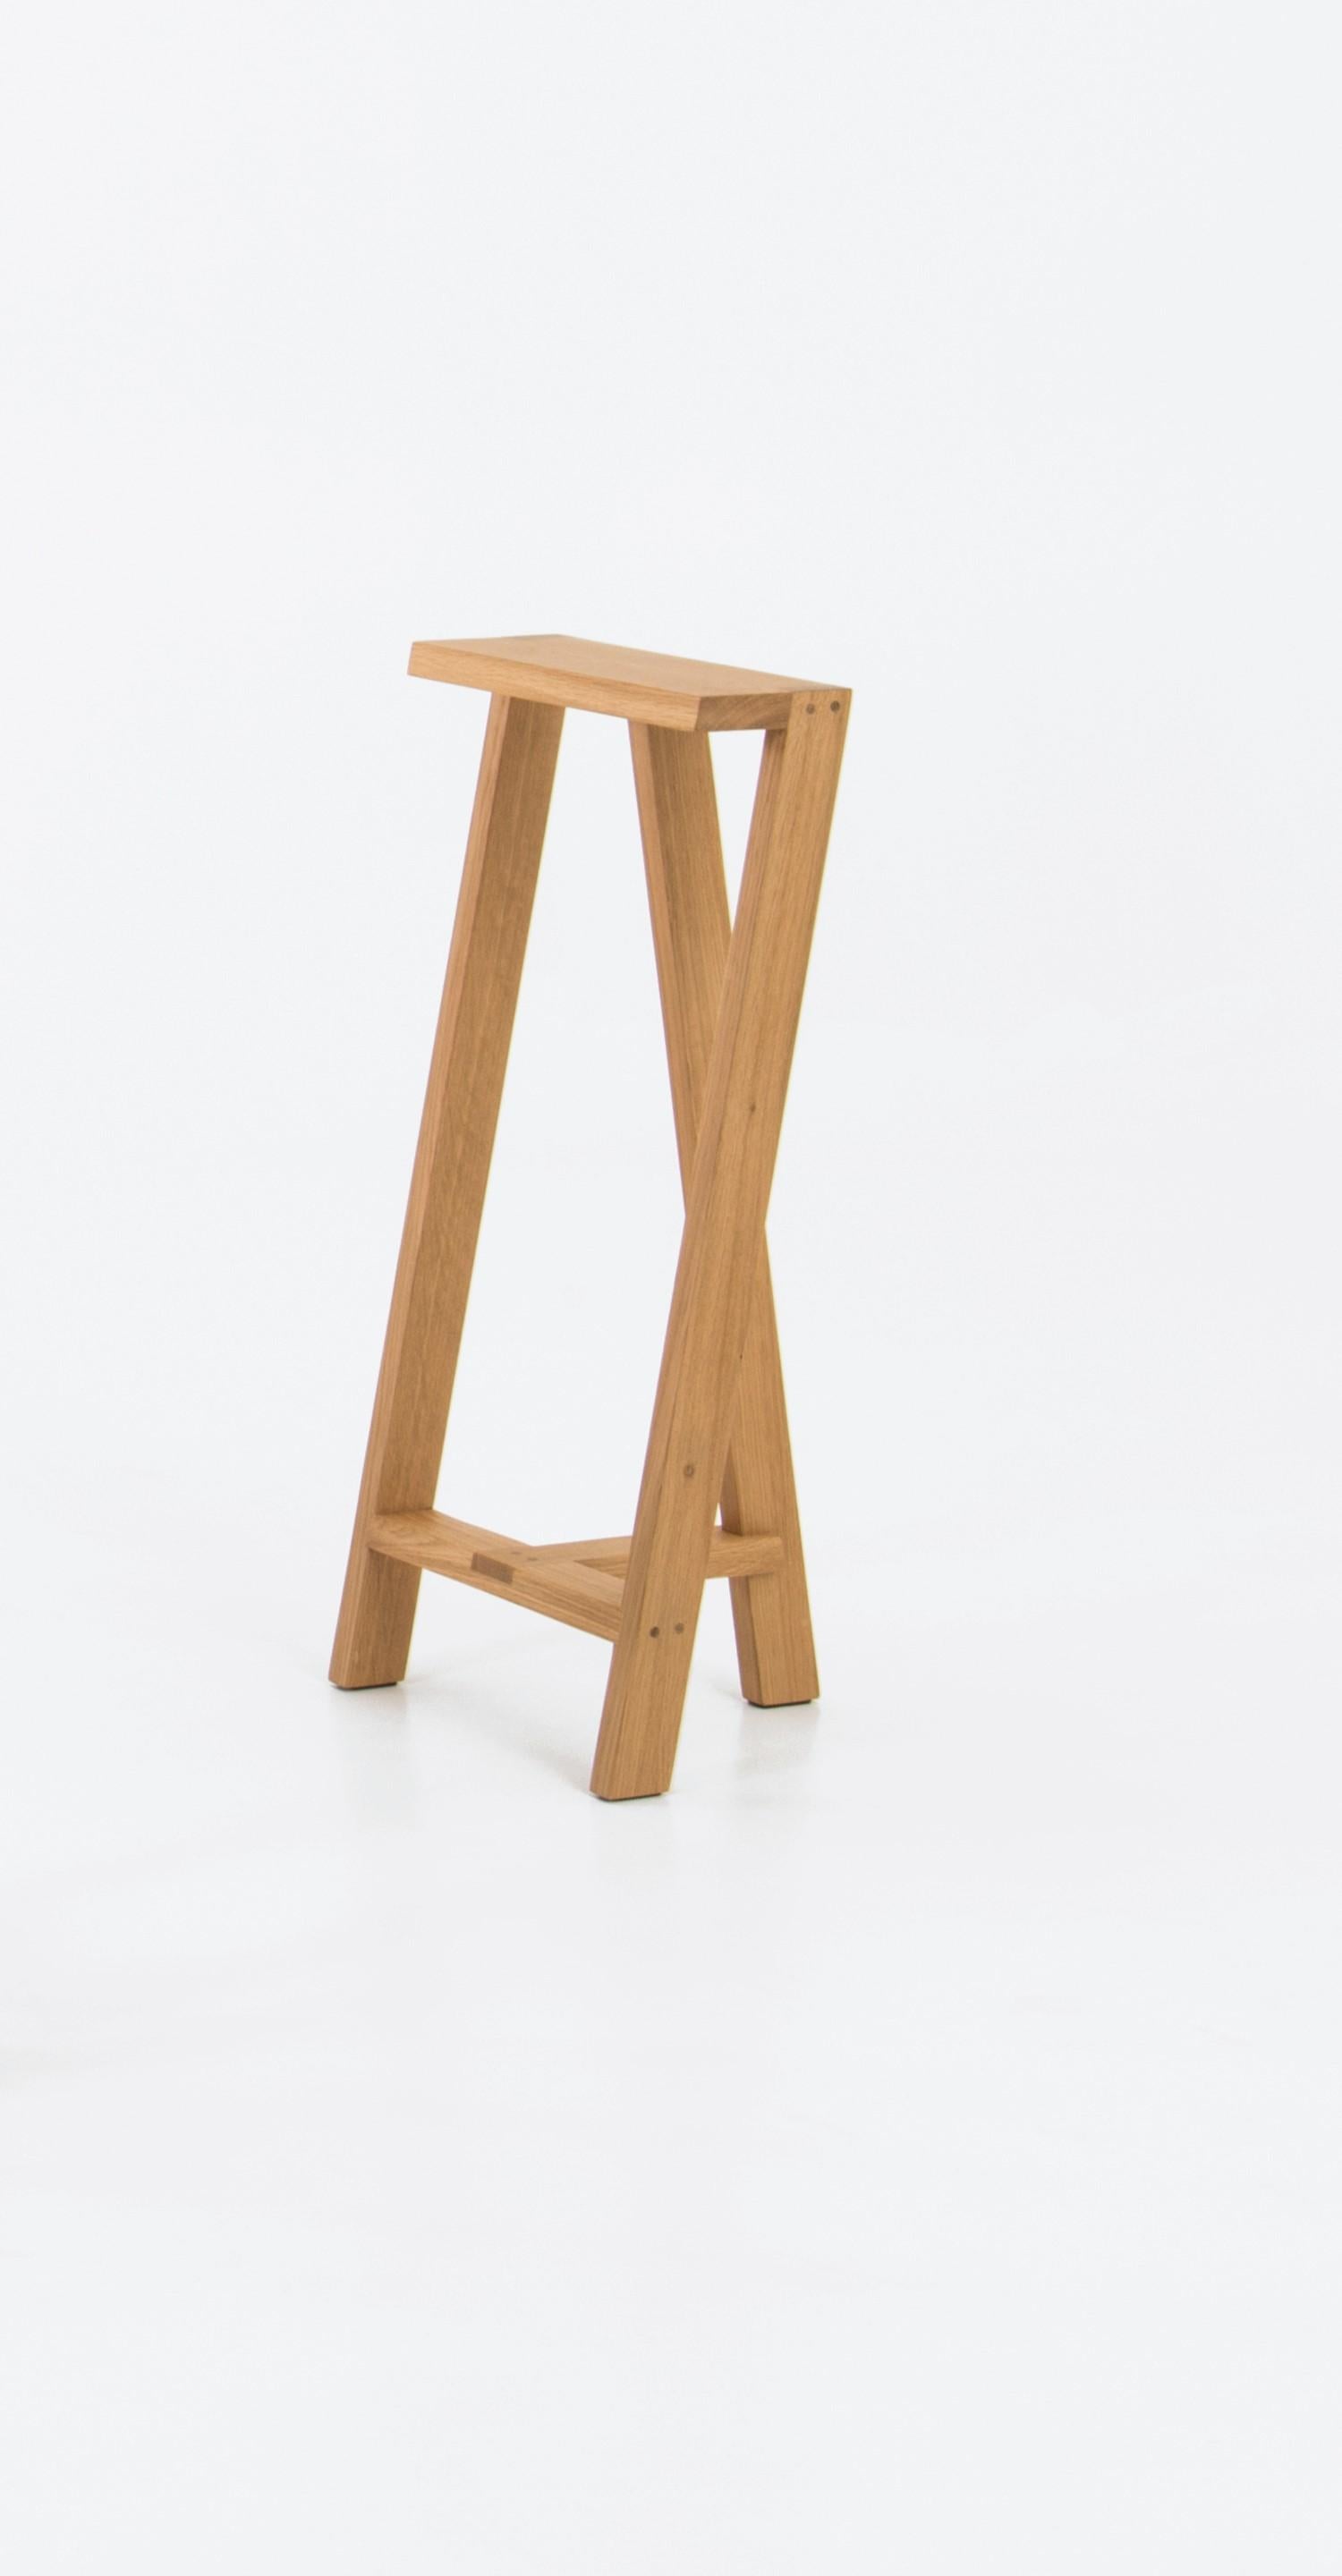 Set of 2 Large Pausa oak stool by Pierre-Emmanuel Vandeputte
Dimensions: D 32 x W 35 x H 80 cm
Materials: oak wood
Available in burnt oak version and in 3 sizes

Pausa is a series of stools; 45cm, 65cm, or 80cm of assembled oak pieces. 
The